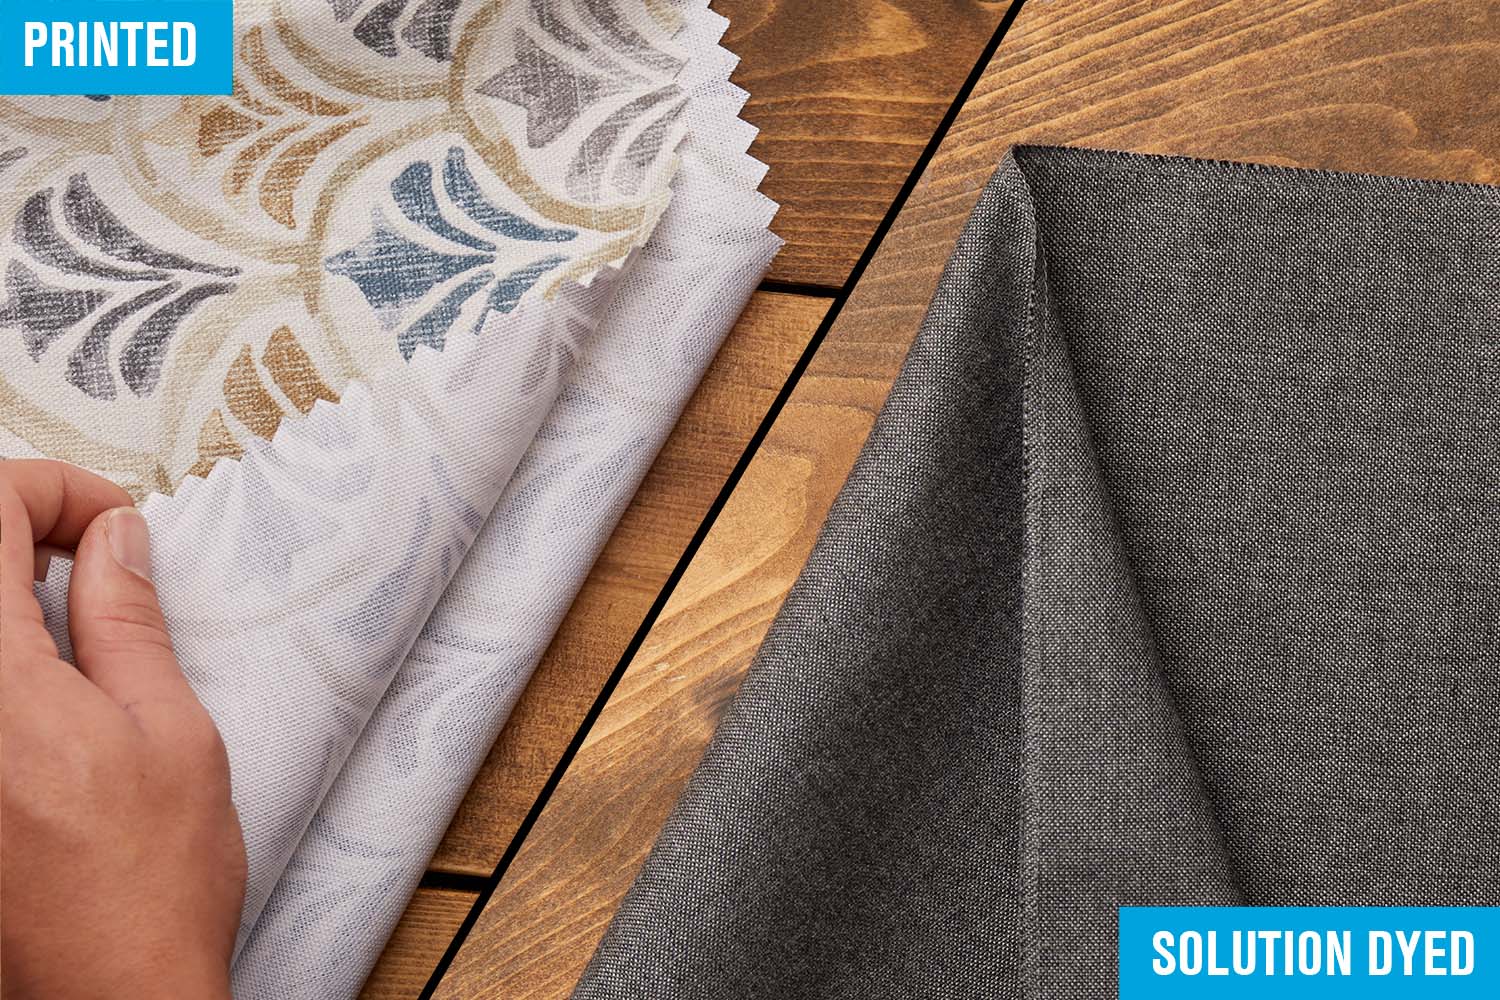 a side-by-side comparison of a printed and a solution-dyed fabric